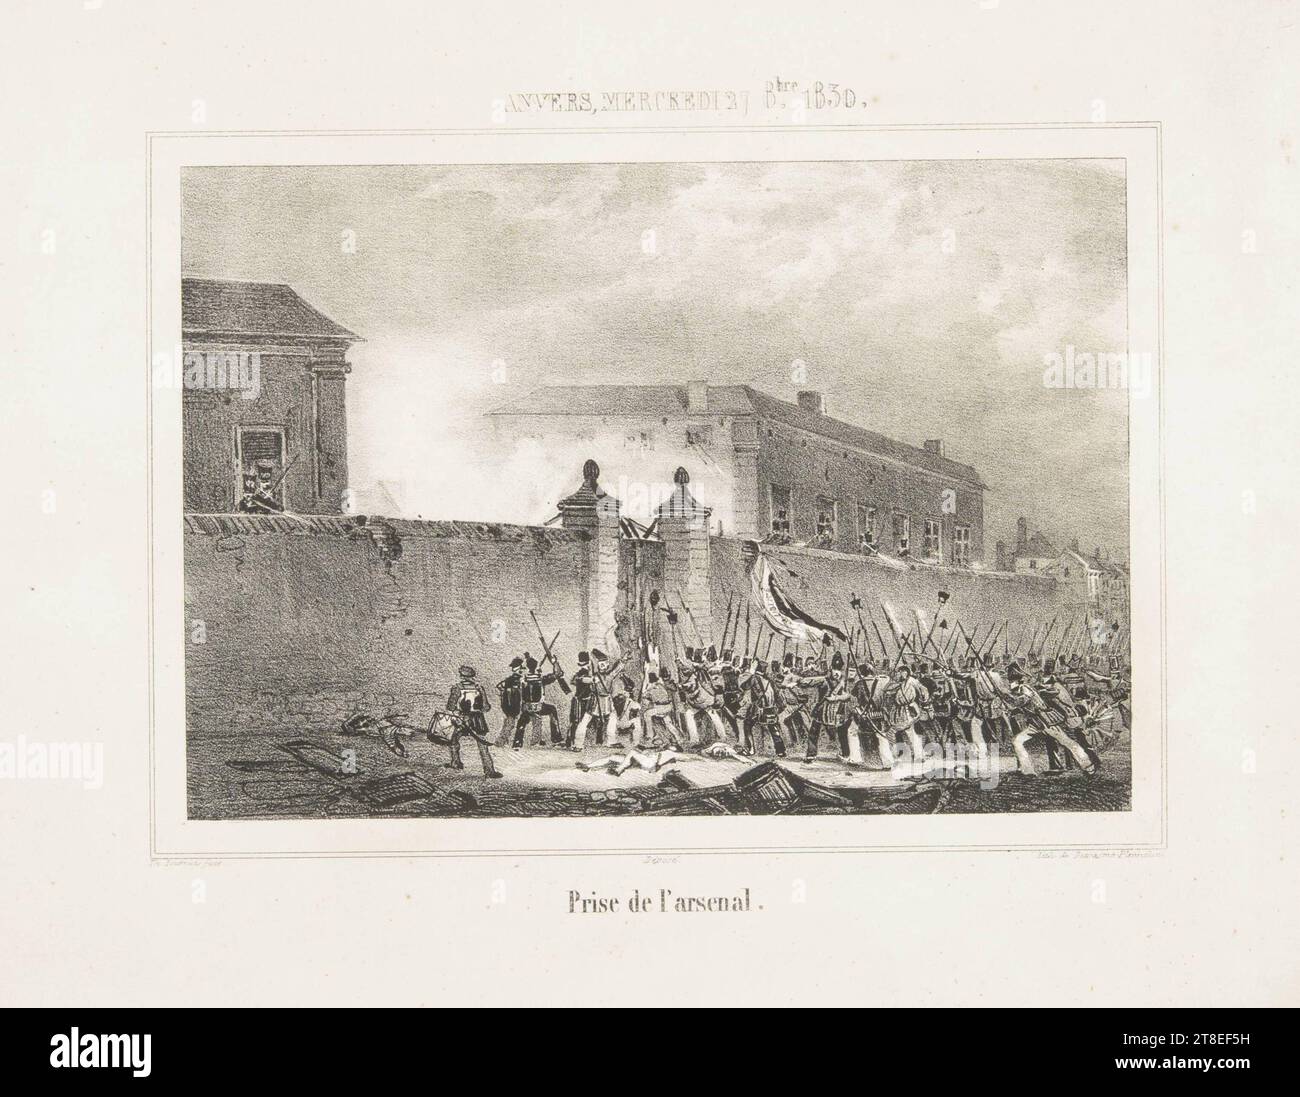 Capture by Belgian insurgents of the Arsenal at Antwerp, occupied by the Dutch 1830. Antwerp. Belgian independence. ANTWERP, WEDNESDAY 27 October 1830. Capture of the Arsenal. Lith. by Dewasme-Pletinckx Stock Photo